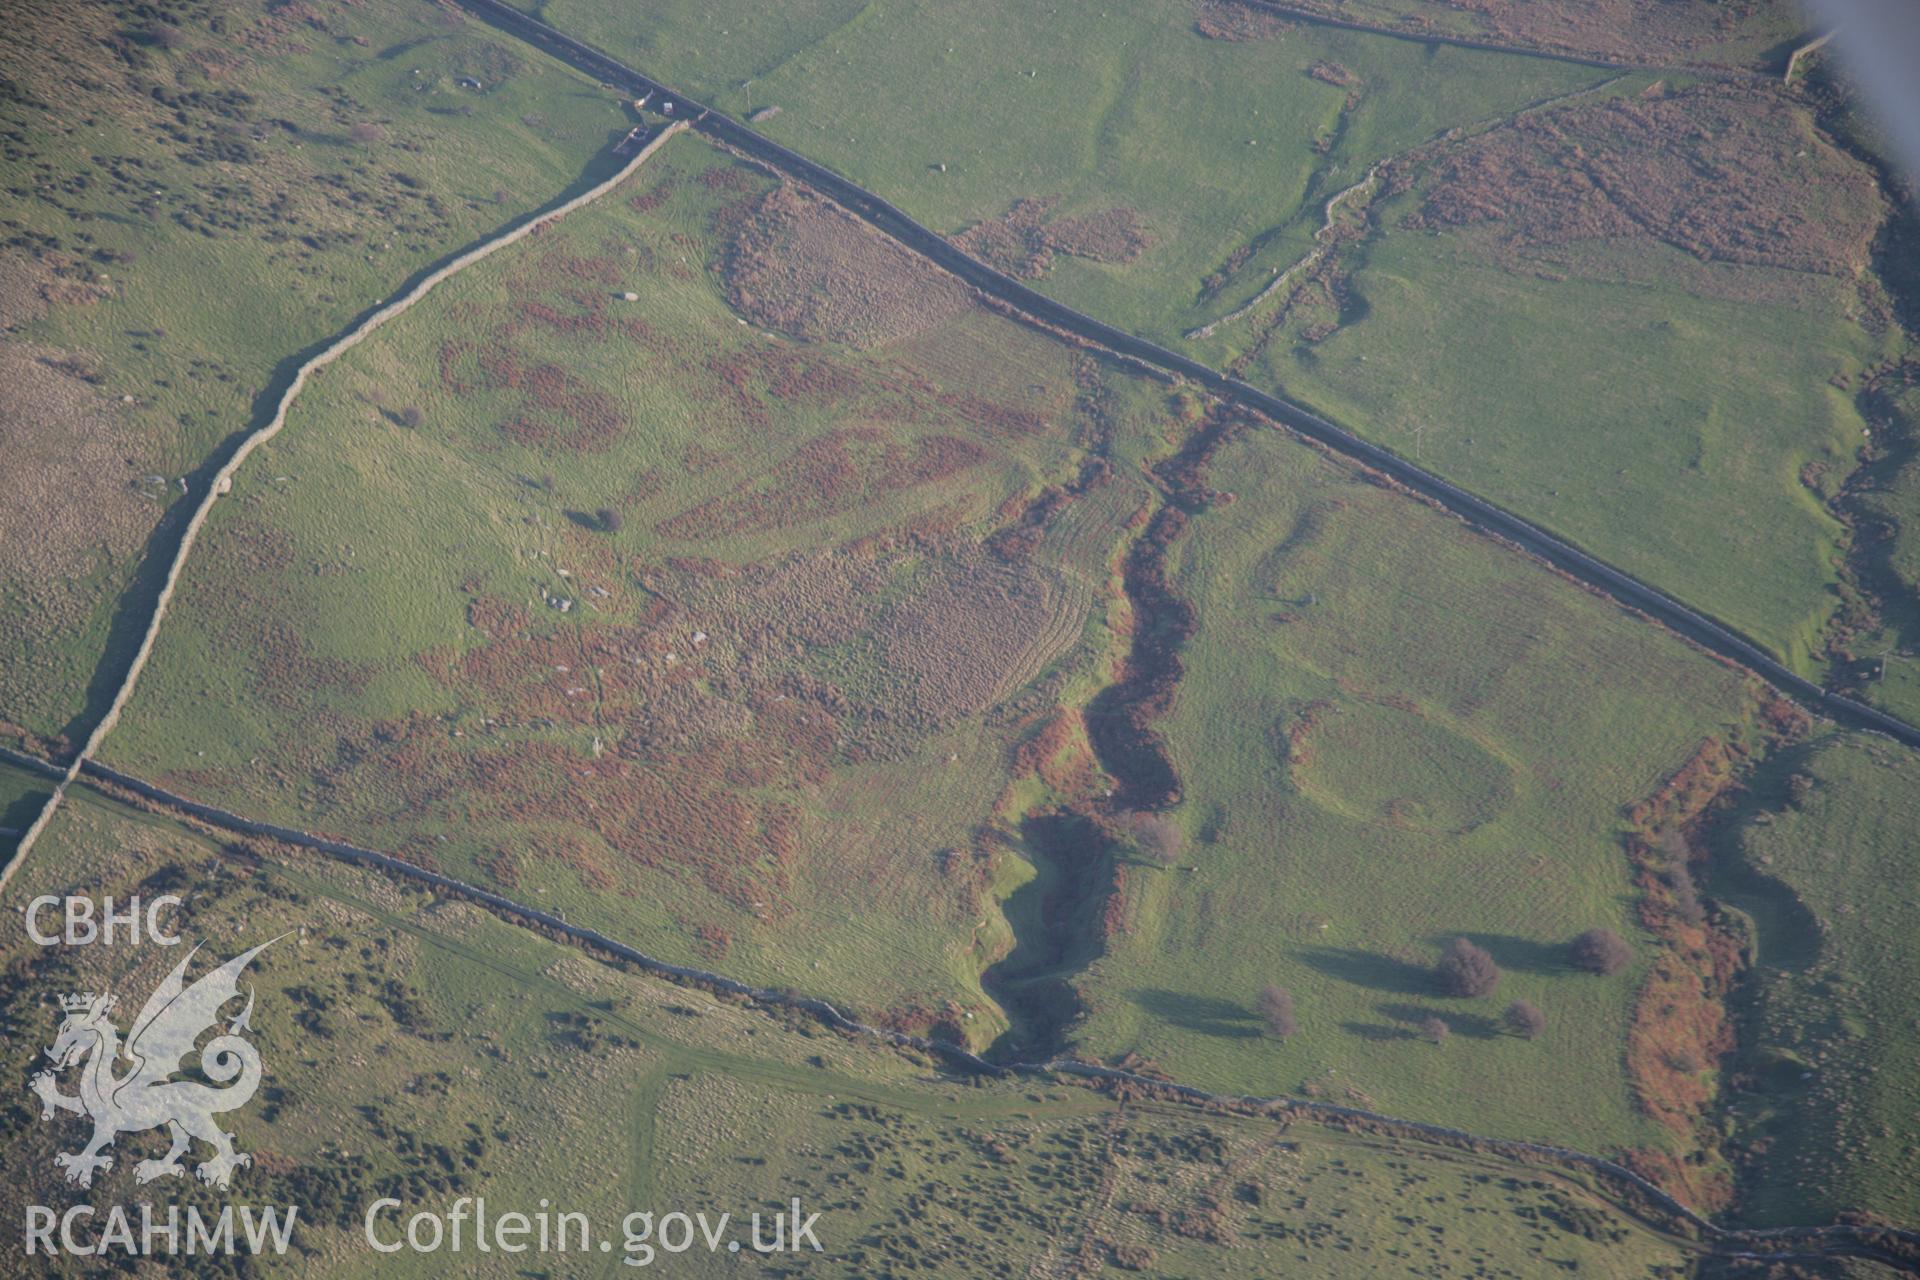 RCAHMW colour oblique aerial photograph of a homestead near Maen-y-Bardd viewed from the north-west. Taken on 21 November 2005 by Toby Driver